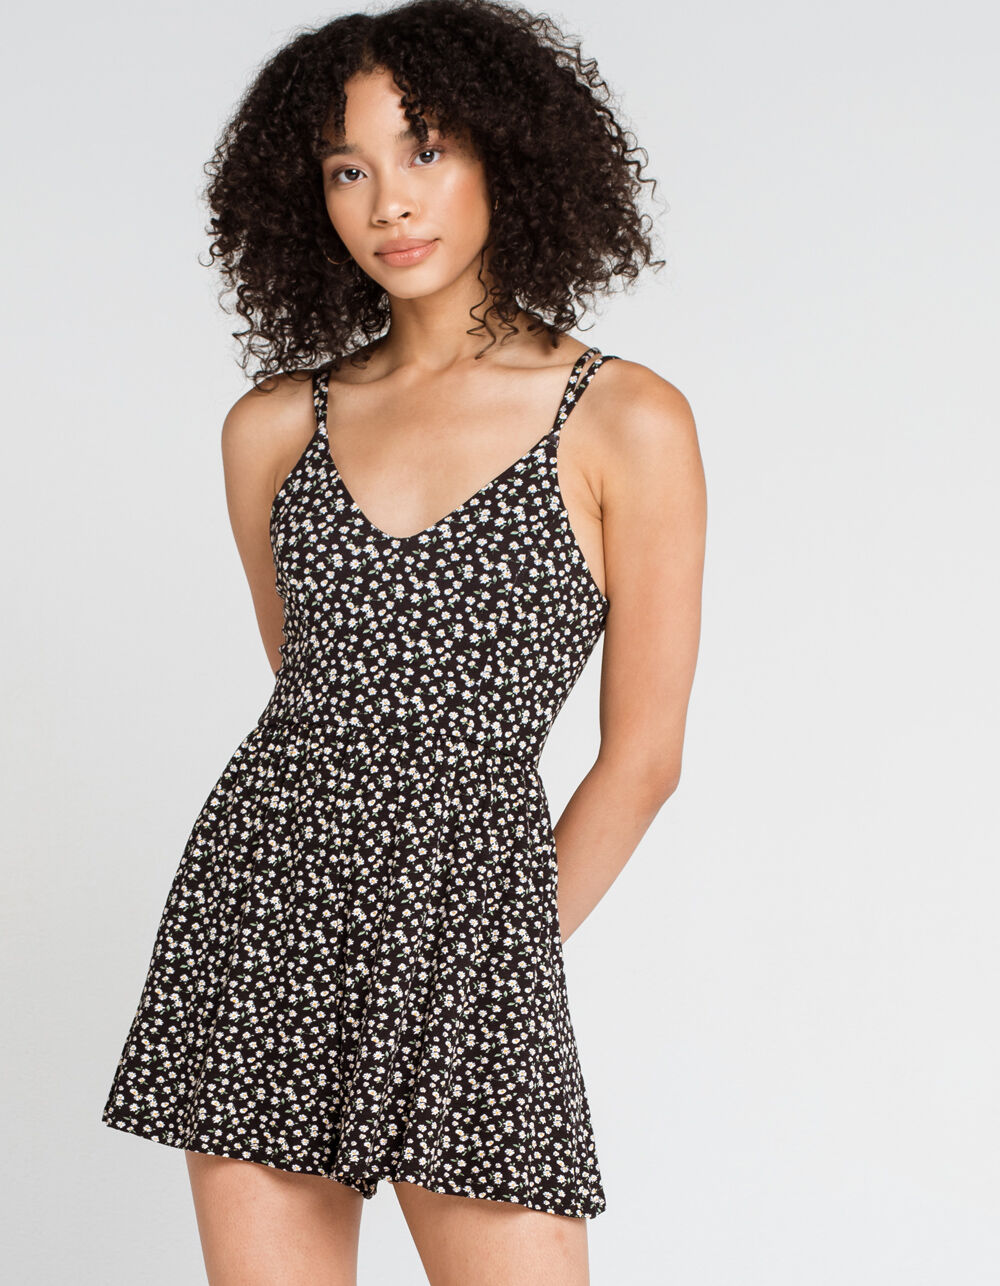 IVY & MAIN Daisy Crossback Double Strap Romper - BLACK COMBO | Tillys